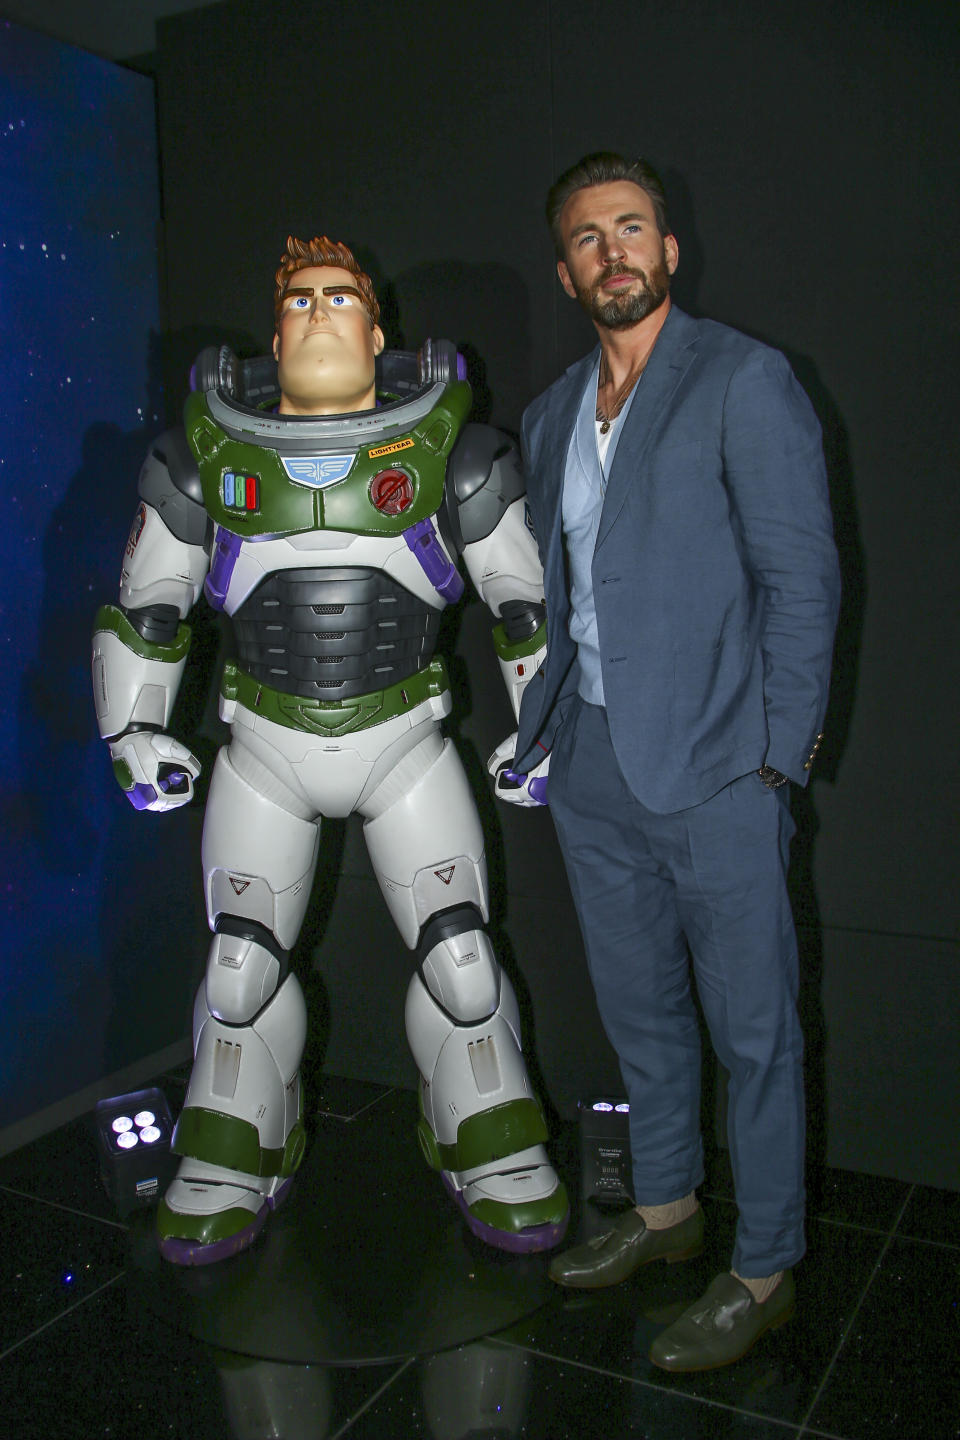 Chris Evans poses with the character Buzz Lightyear for photographers upon arrival for the premiere of the film 'Lightyear' in London, Monday, June 13, 2022. (Photo by Joel C Ryan/Invision/AP)